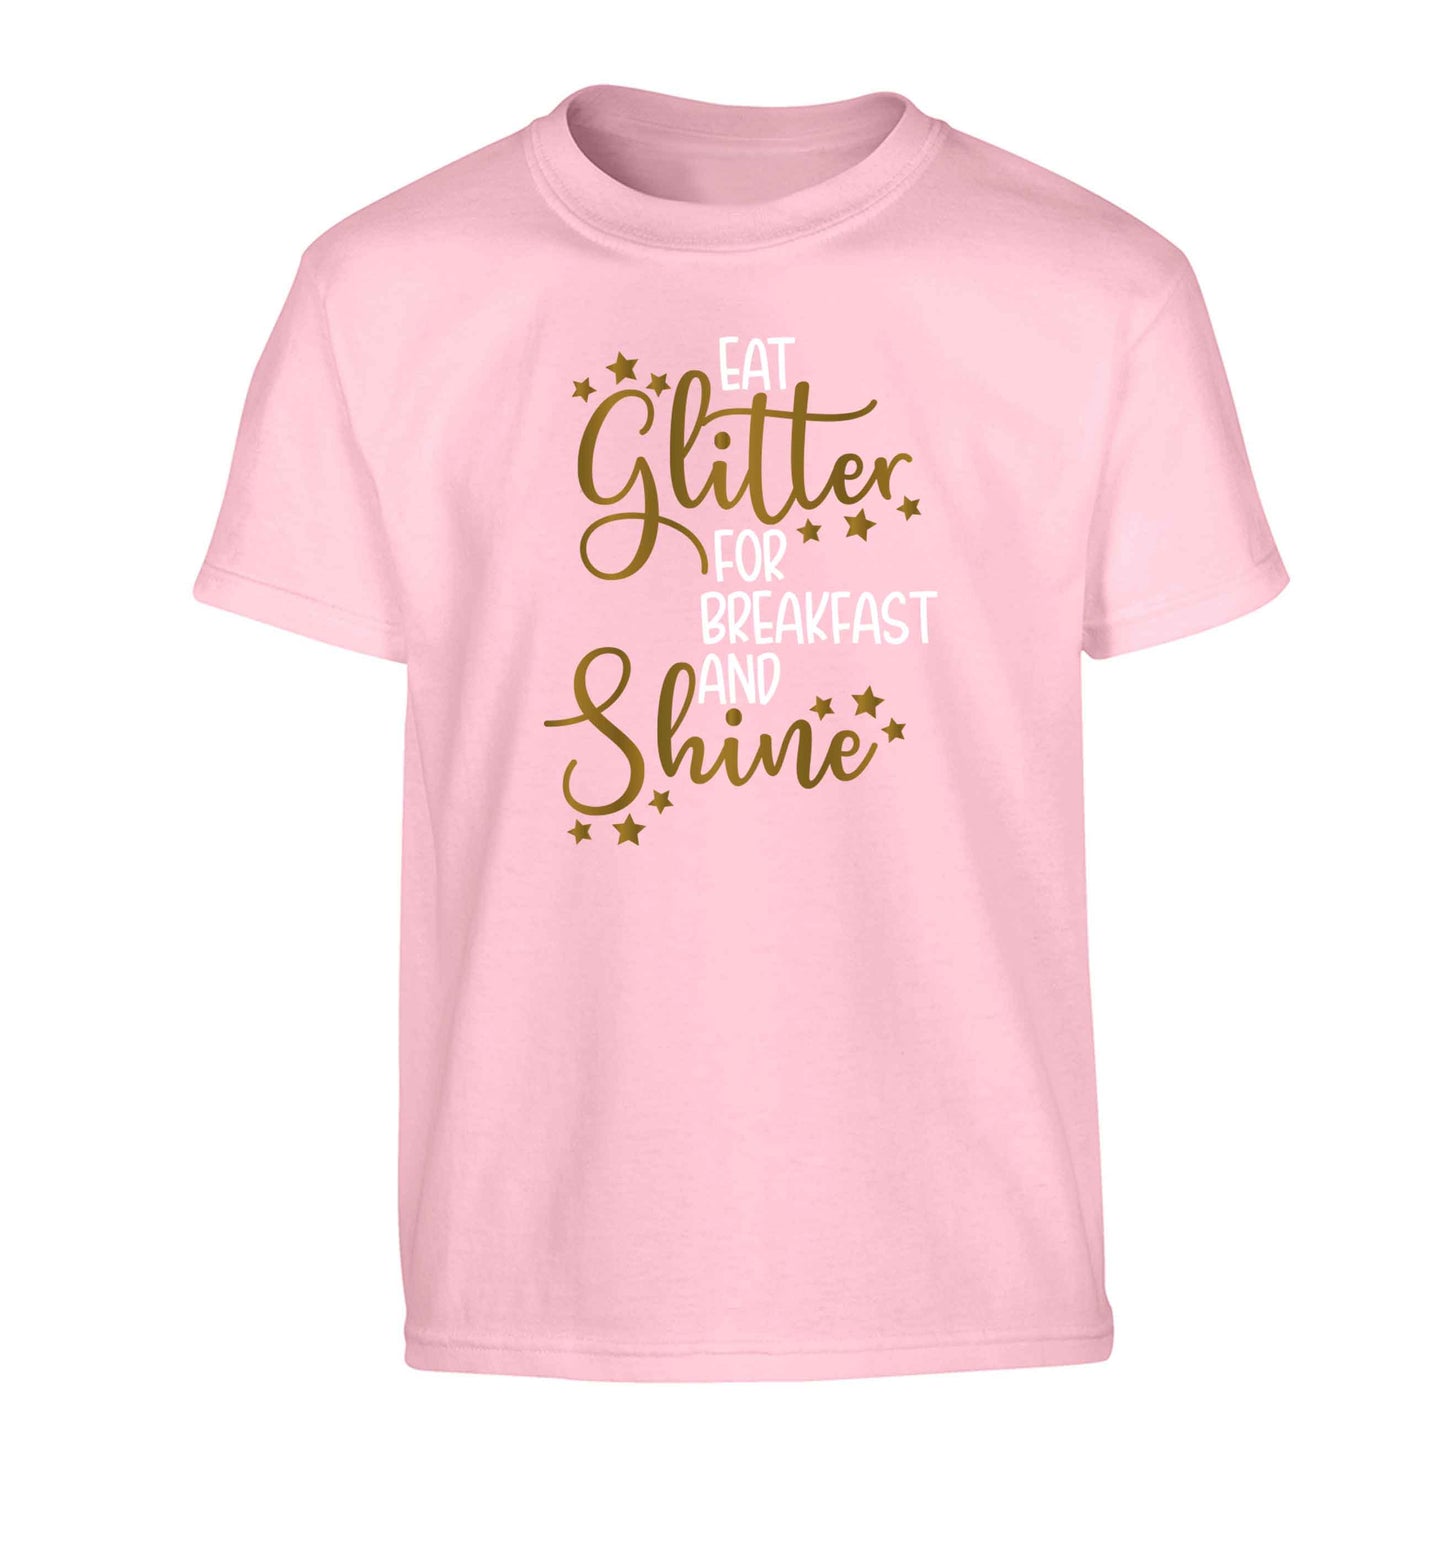 Eat glitter for breakfast and shine all day Children's light pink Tshirt 12-13 Years